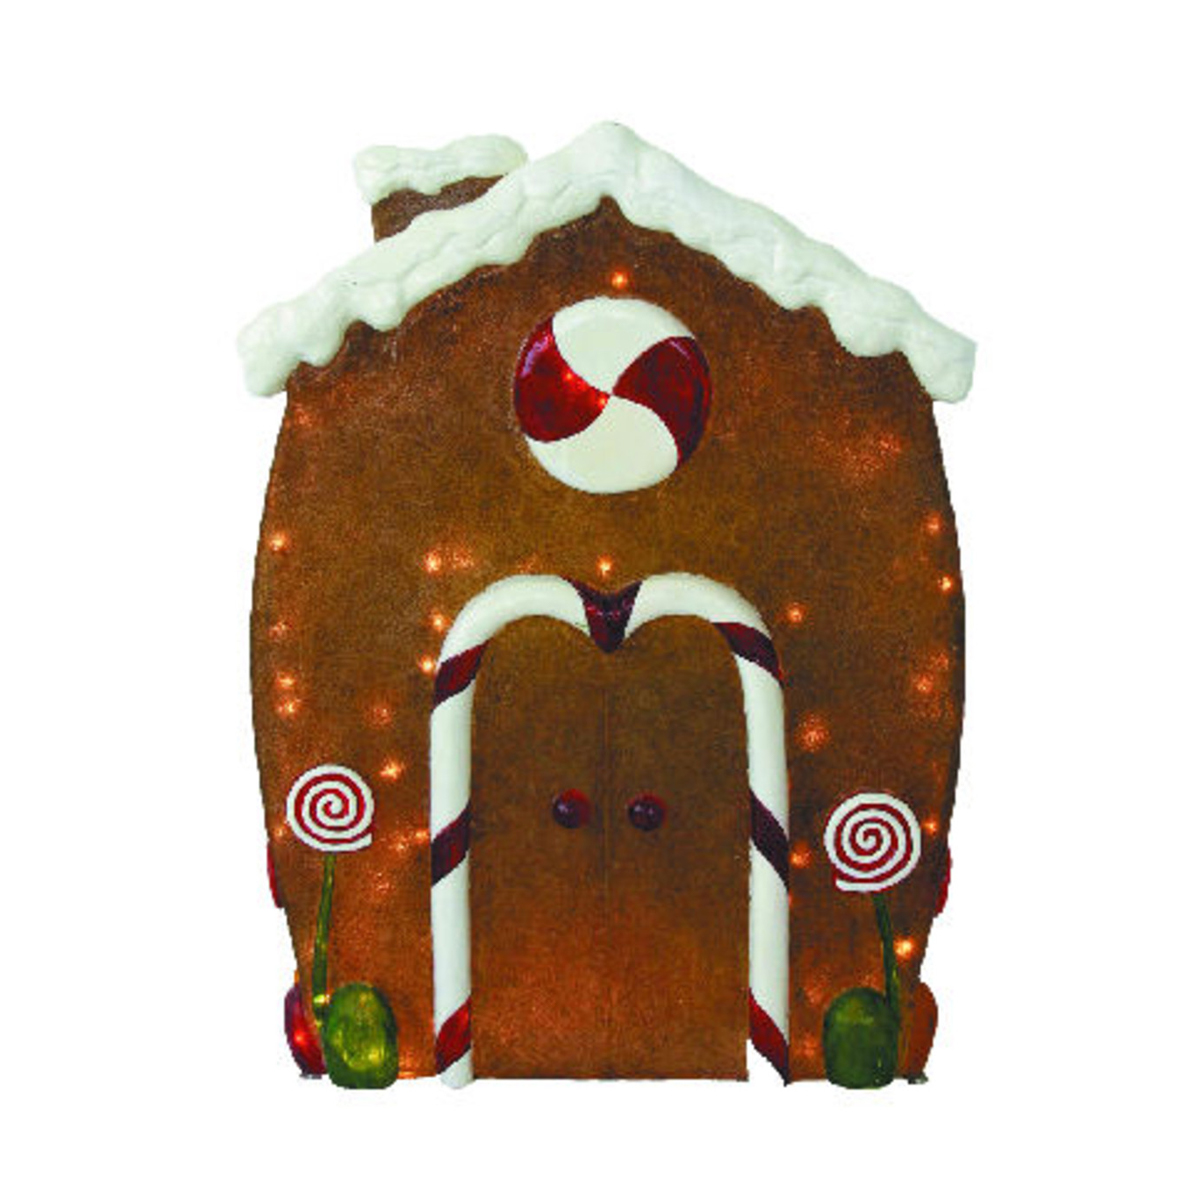 Illuminated 44 Inch Gingerbread House